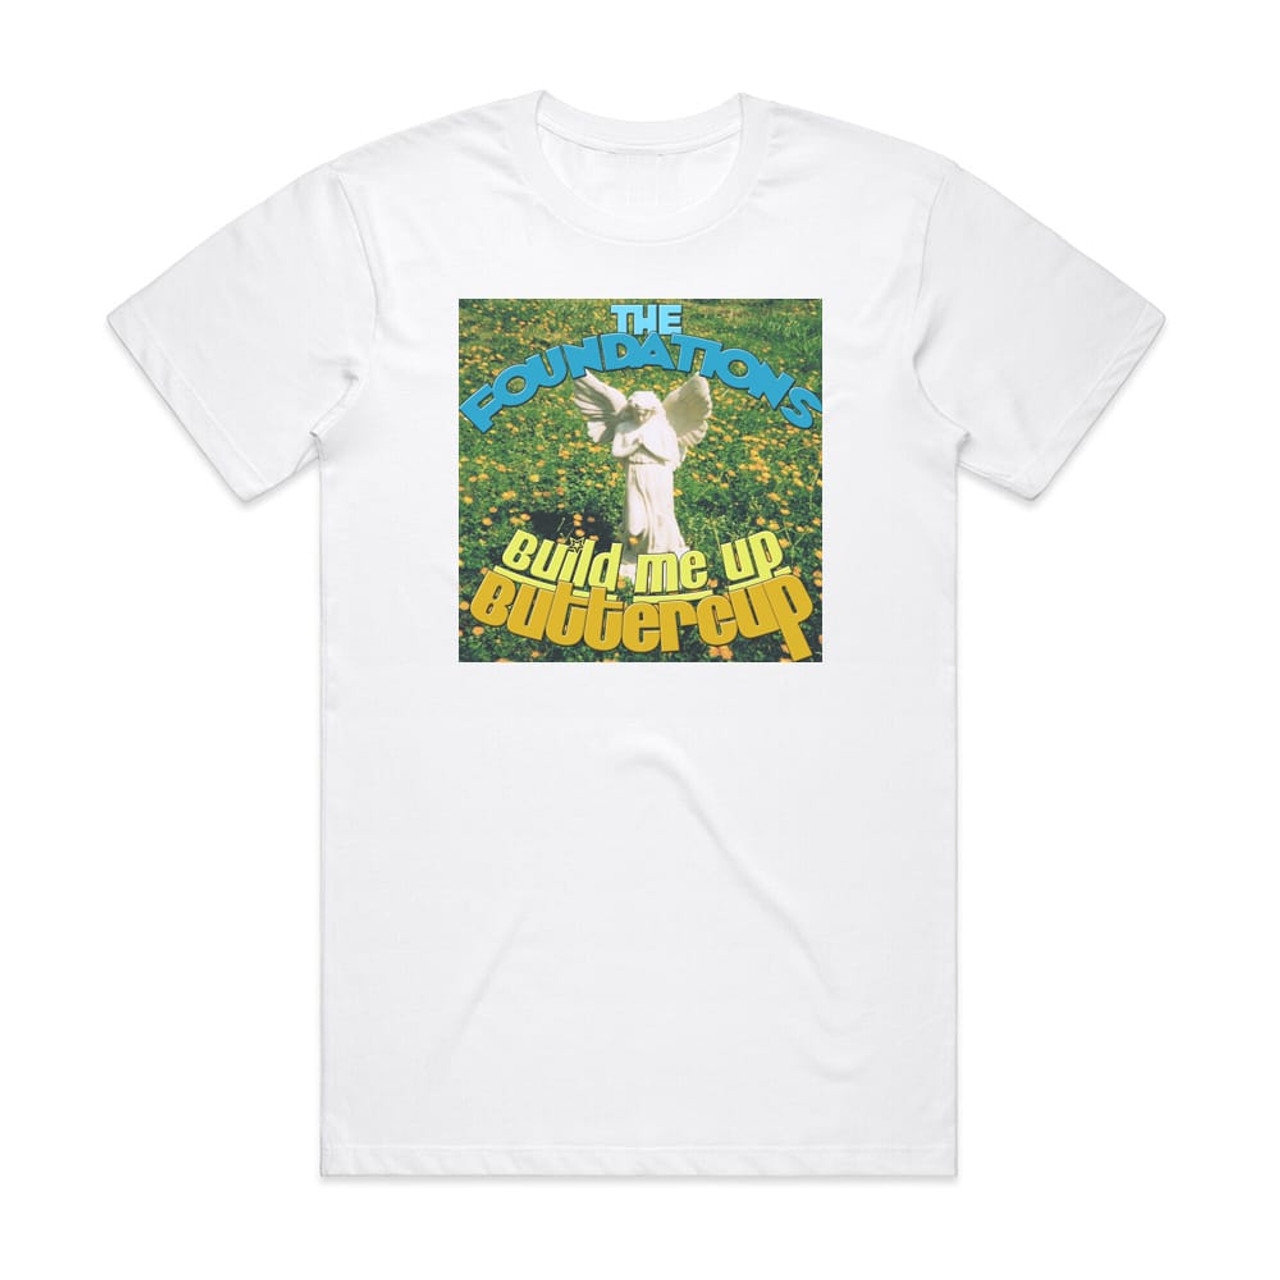 The Foundations Build Me Up Buttercup Album Cover T-Shirt White